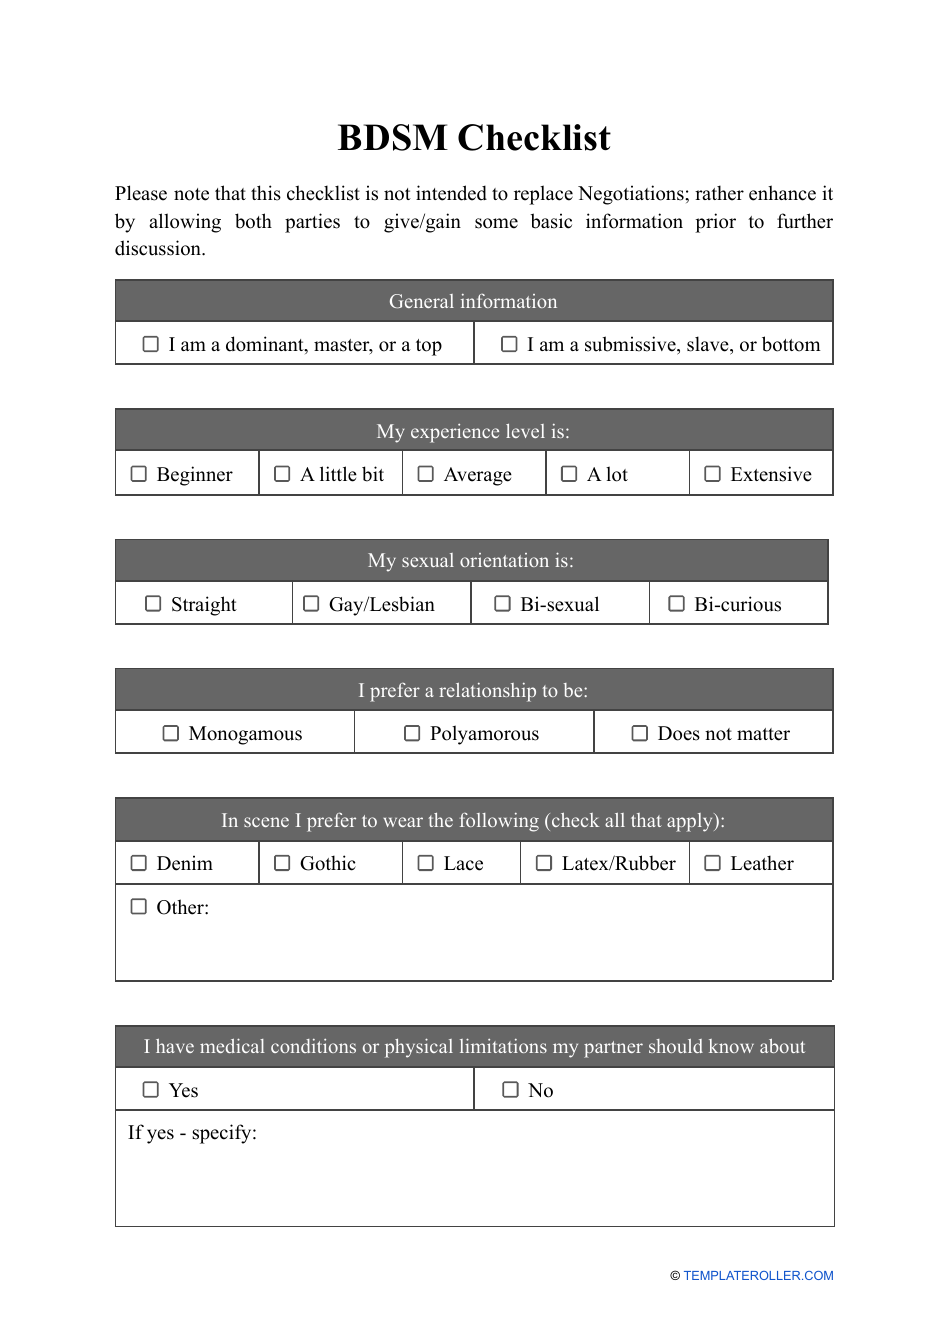 BDSM Checklist Template - Free to Download and Use